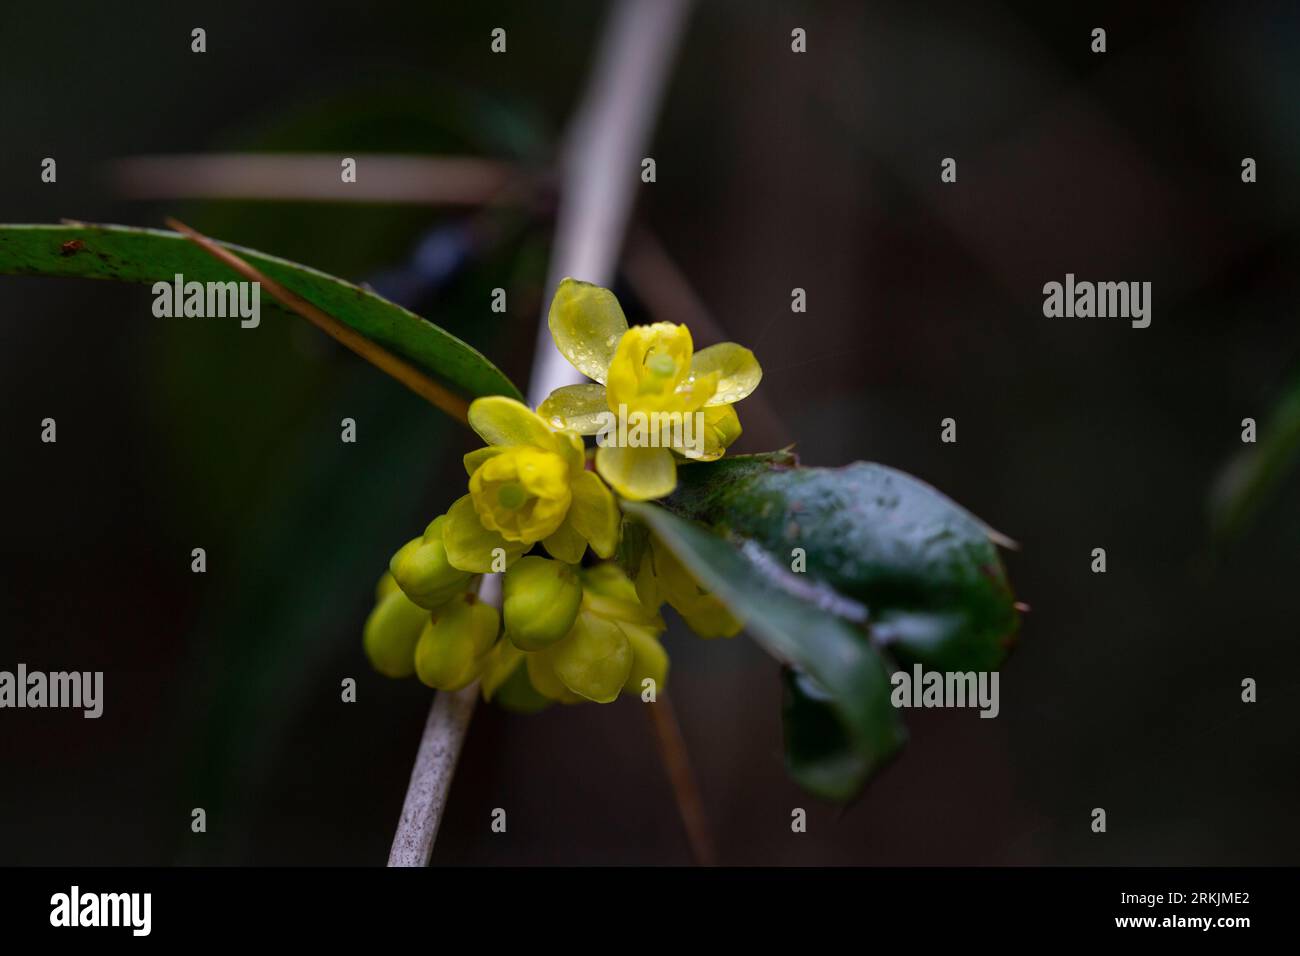 Flowering bush of barberry Berberis soulieana in Southern Cultures Arboretum. Narrow evergreen leaves and yellow flowers. Close-up. Spring. Sirius (Ad Stock Photo